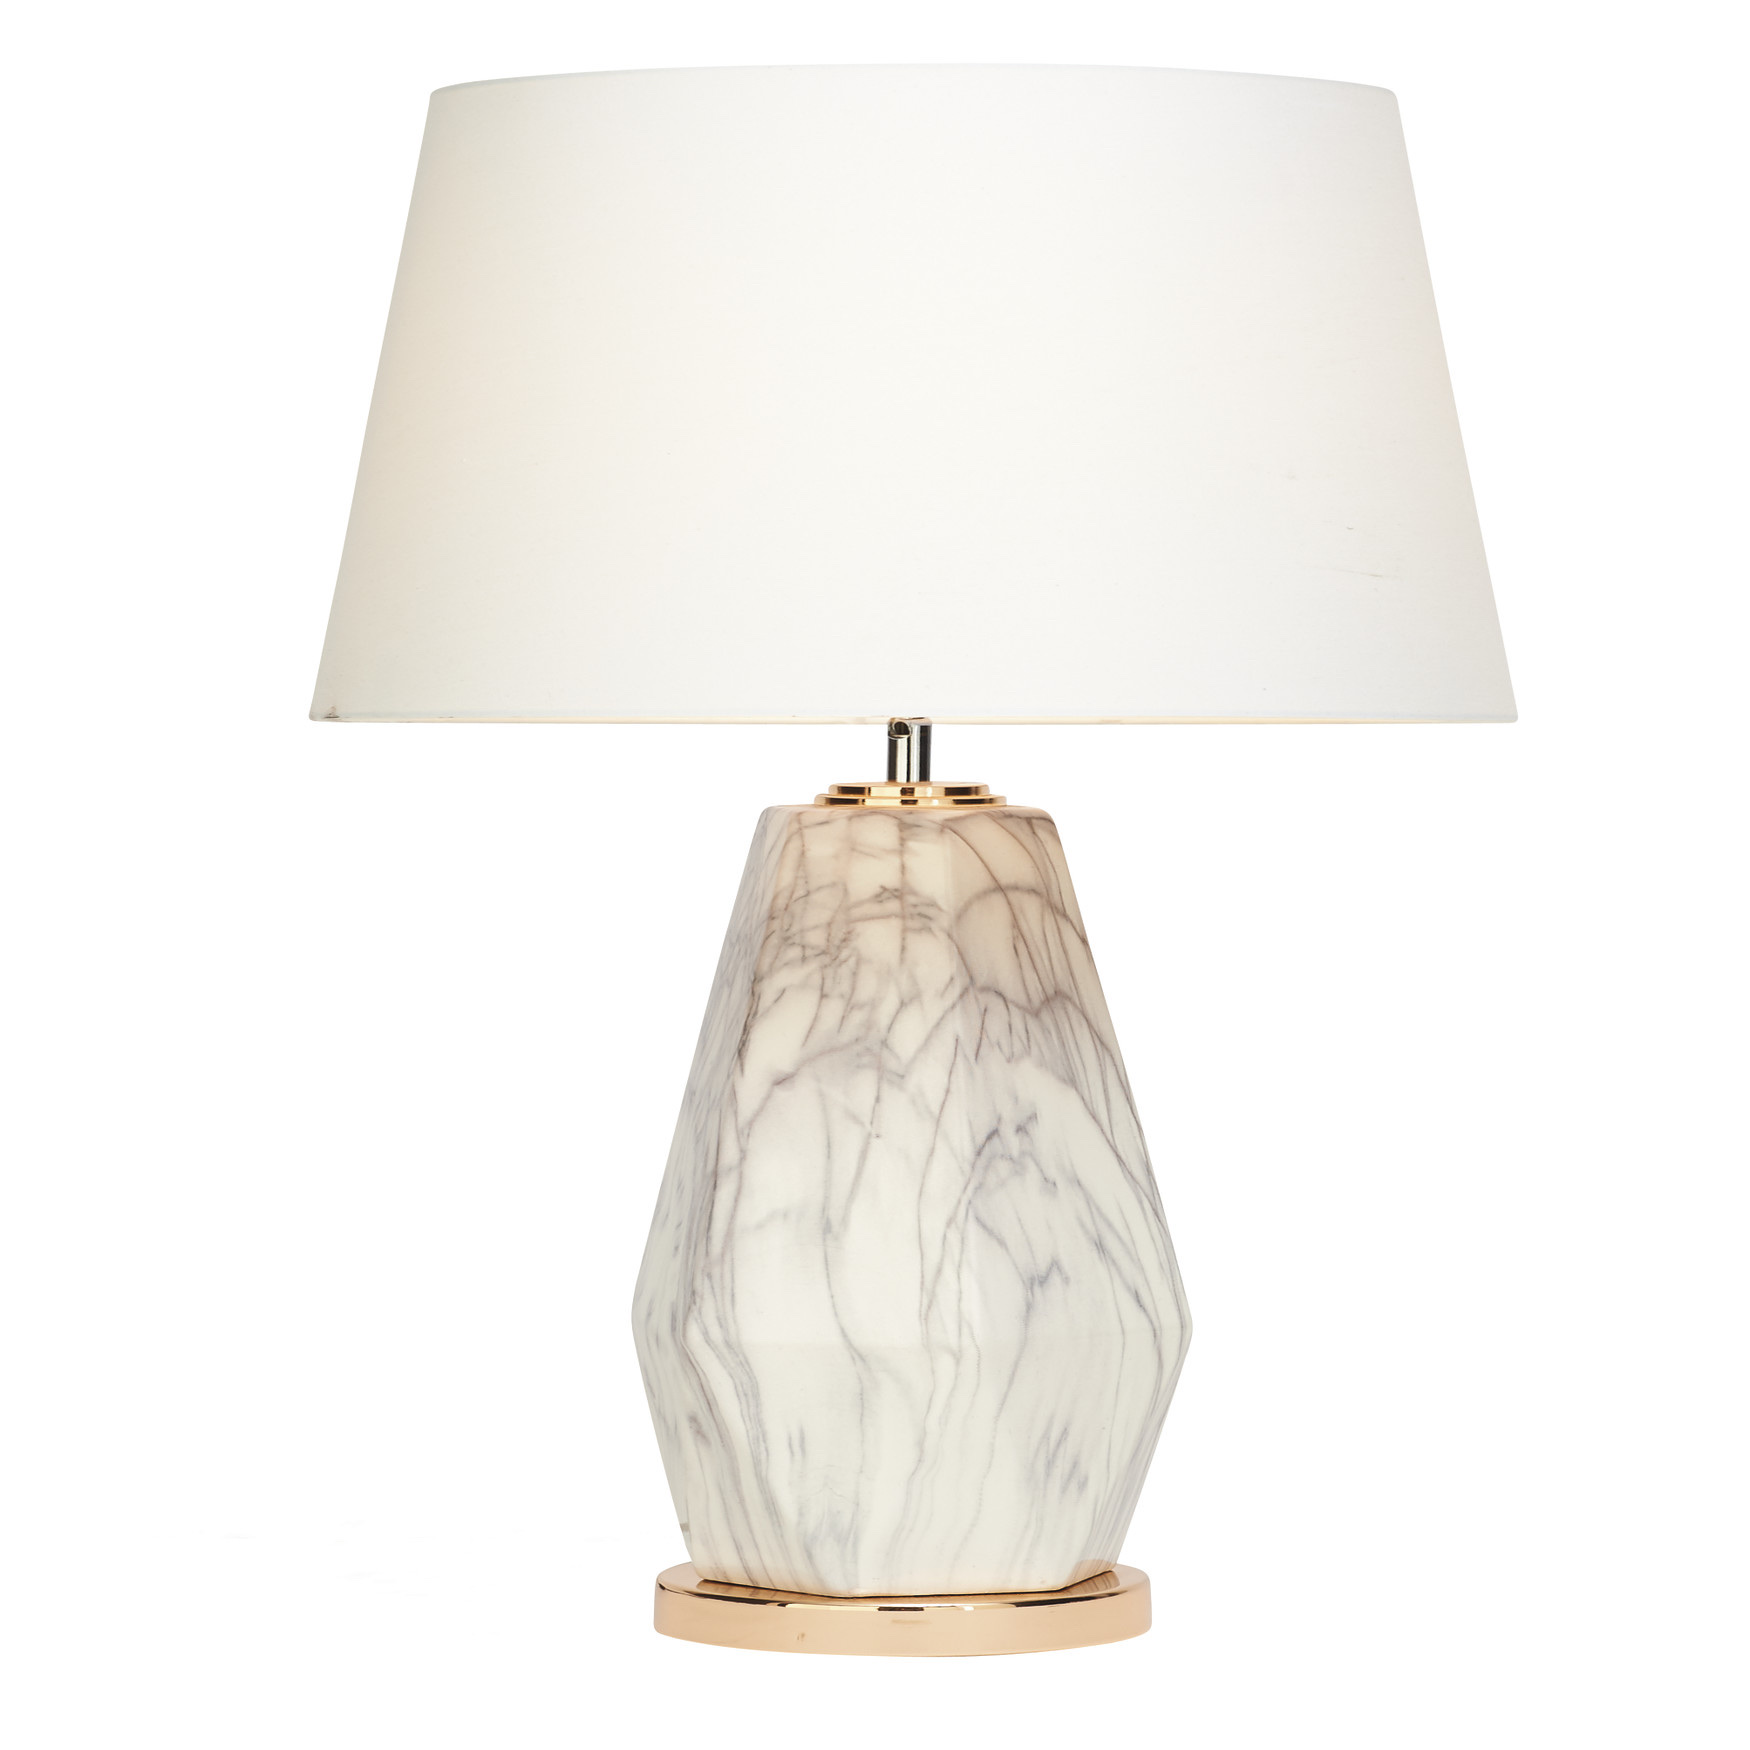 Cosmoliving By Cosmopolitan Stone Glam Table Lamp, GOLD